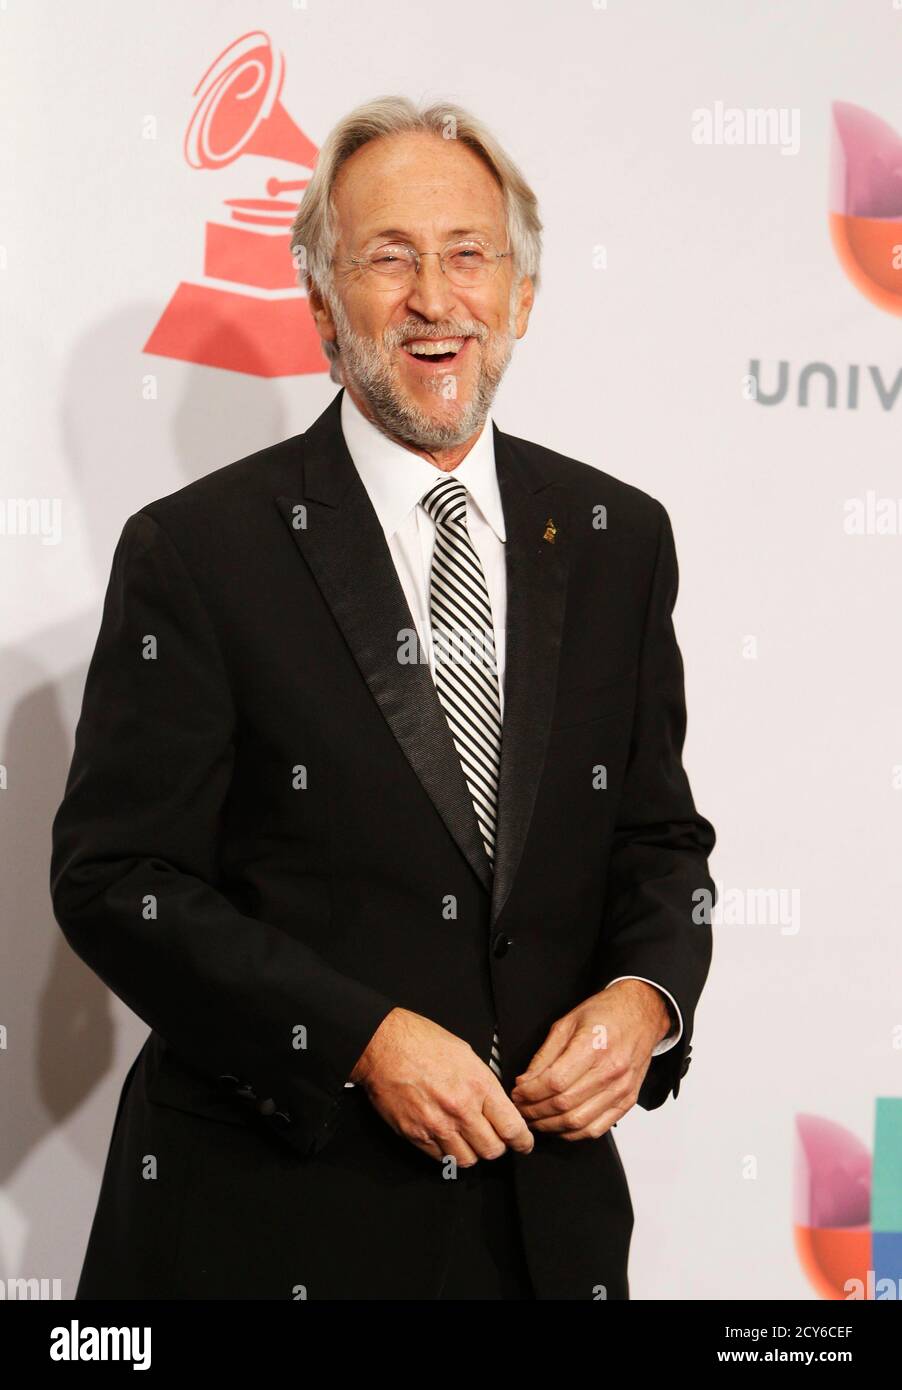 President and CEO of the National Academy of Recording Arts and Sciences Neil Portnow poses backstage during the 15th Annual Latin Grammy Awards in Las Vegas, Nevada November 20, 2014. REUTERS/Steve Marcus (UNITED STATES-Tags: ENTERTAINMENT)(MUSIC-LATINGRAMMY-BACKSTAGE) Stock Photo